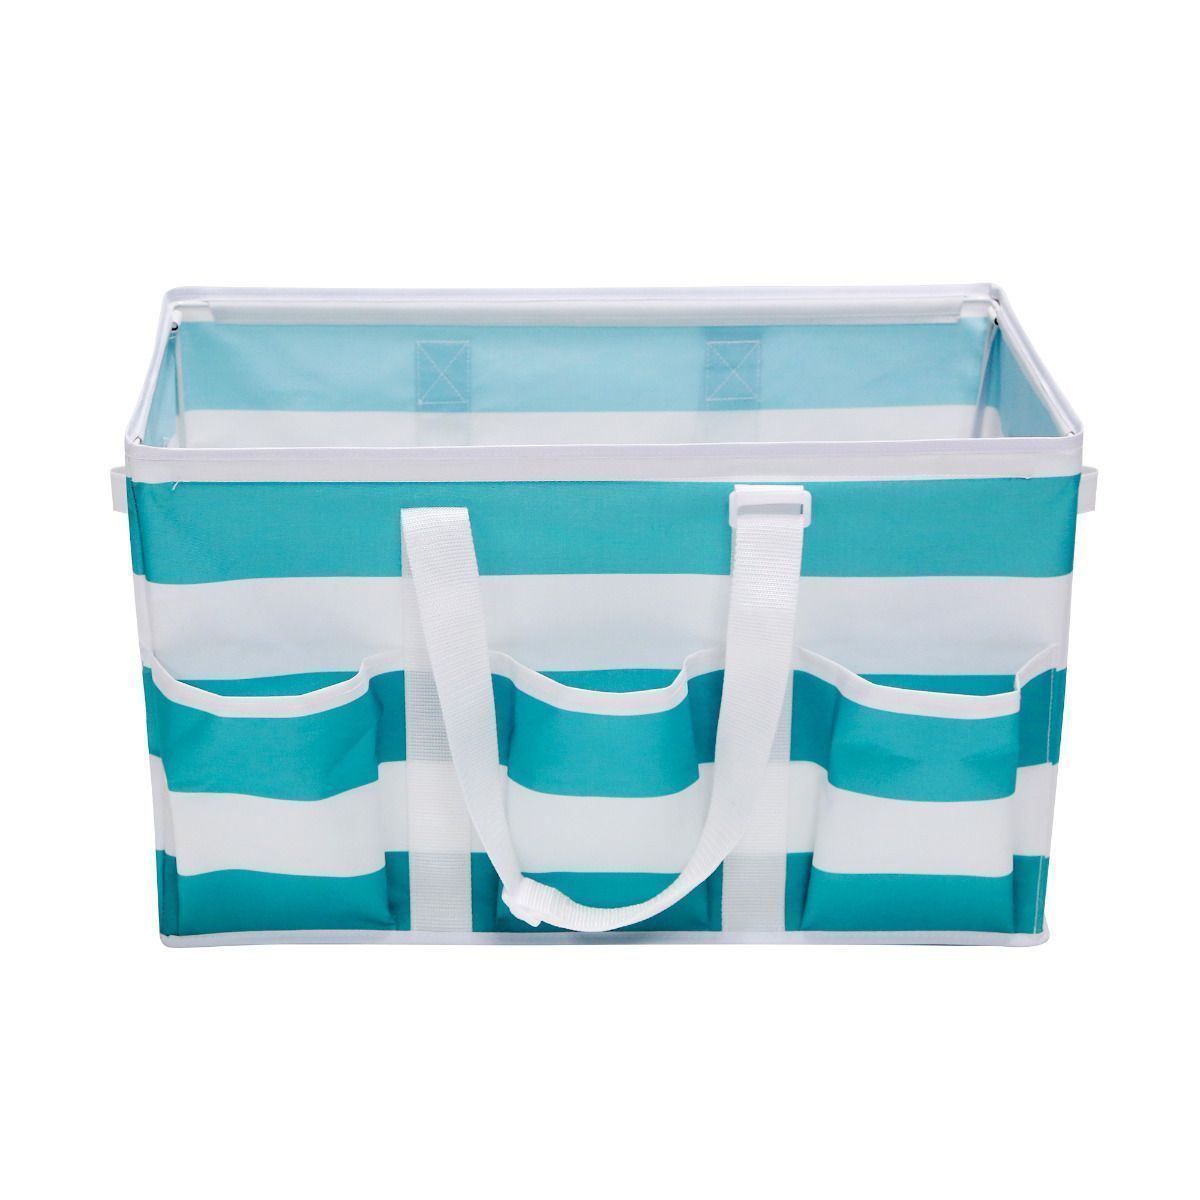 Tidy Living - Utility Tote Teal Rugby Stripe - Multipurpose Storage Solution Bag - image 4 of 5